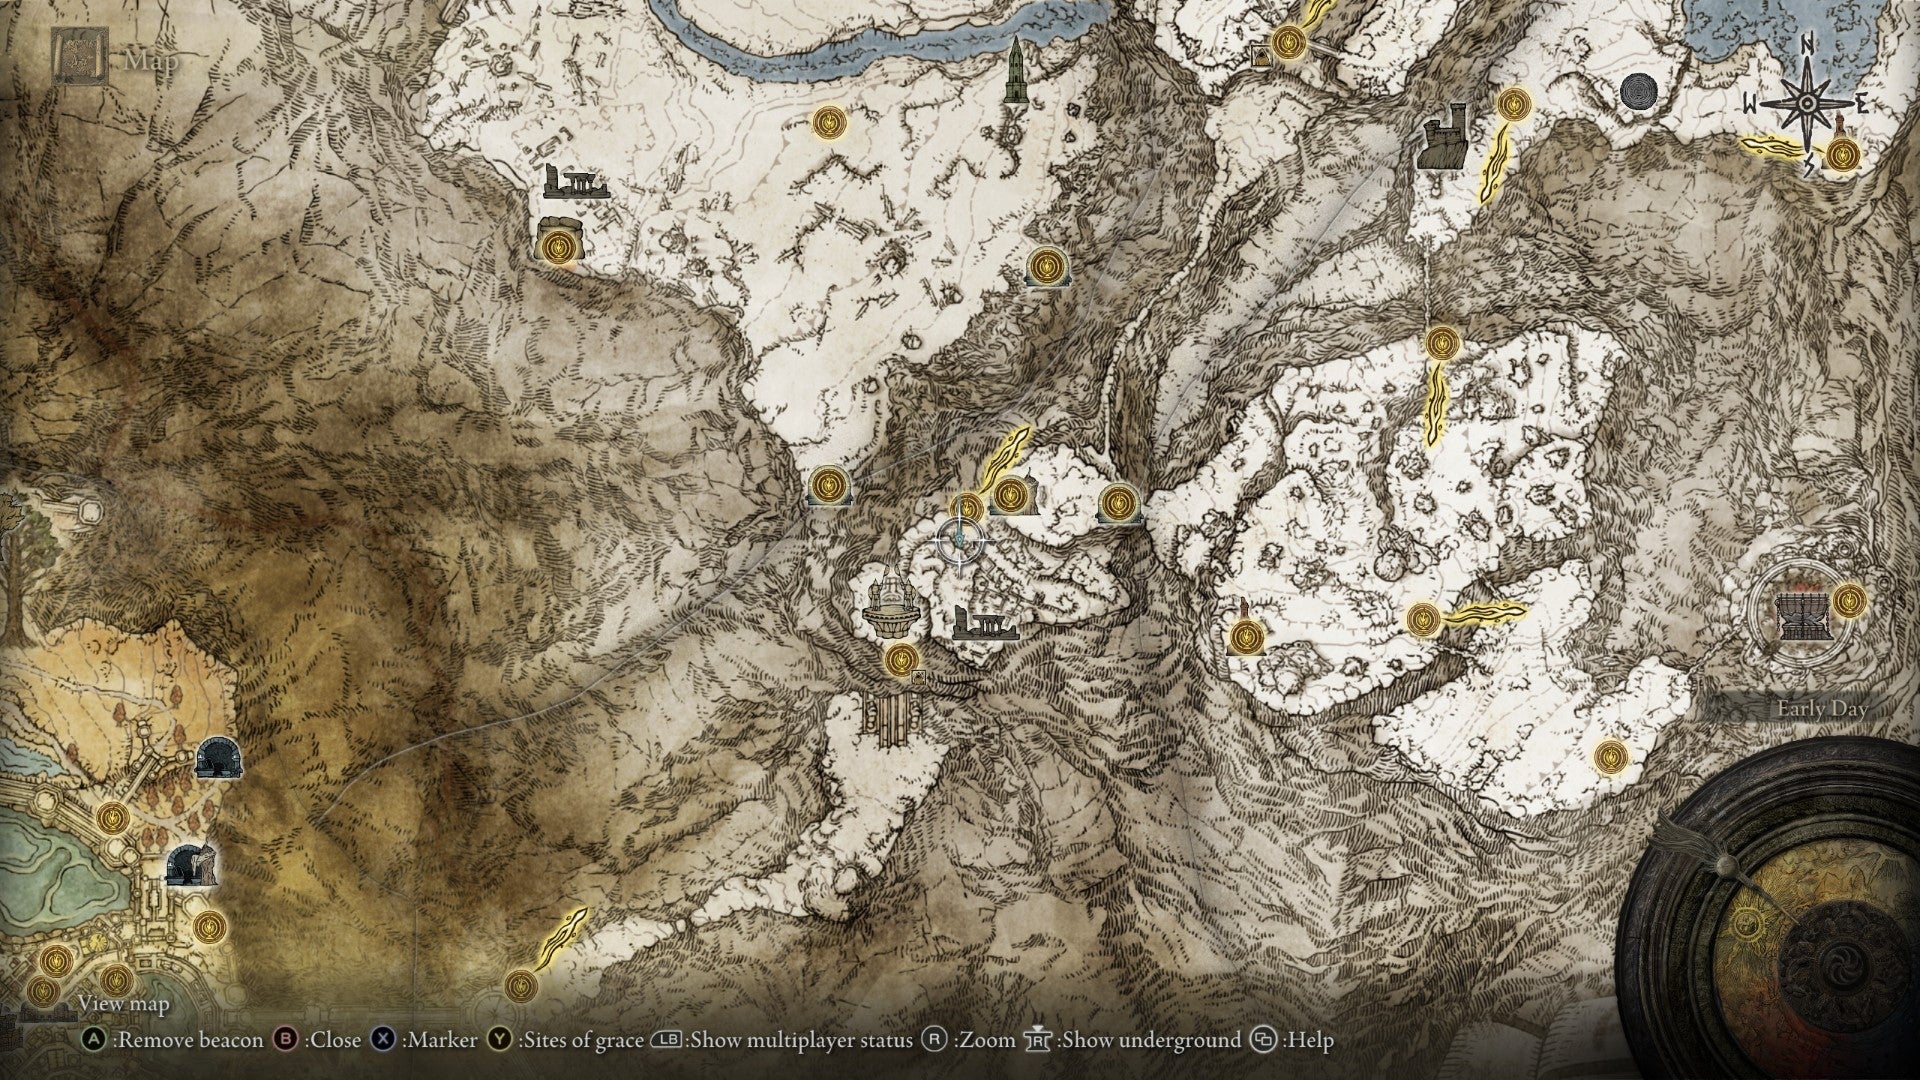 The location of the Mountaintops of the Giants West map fragment in Elden Ring